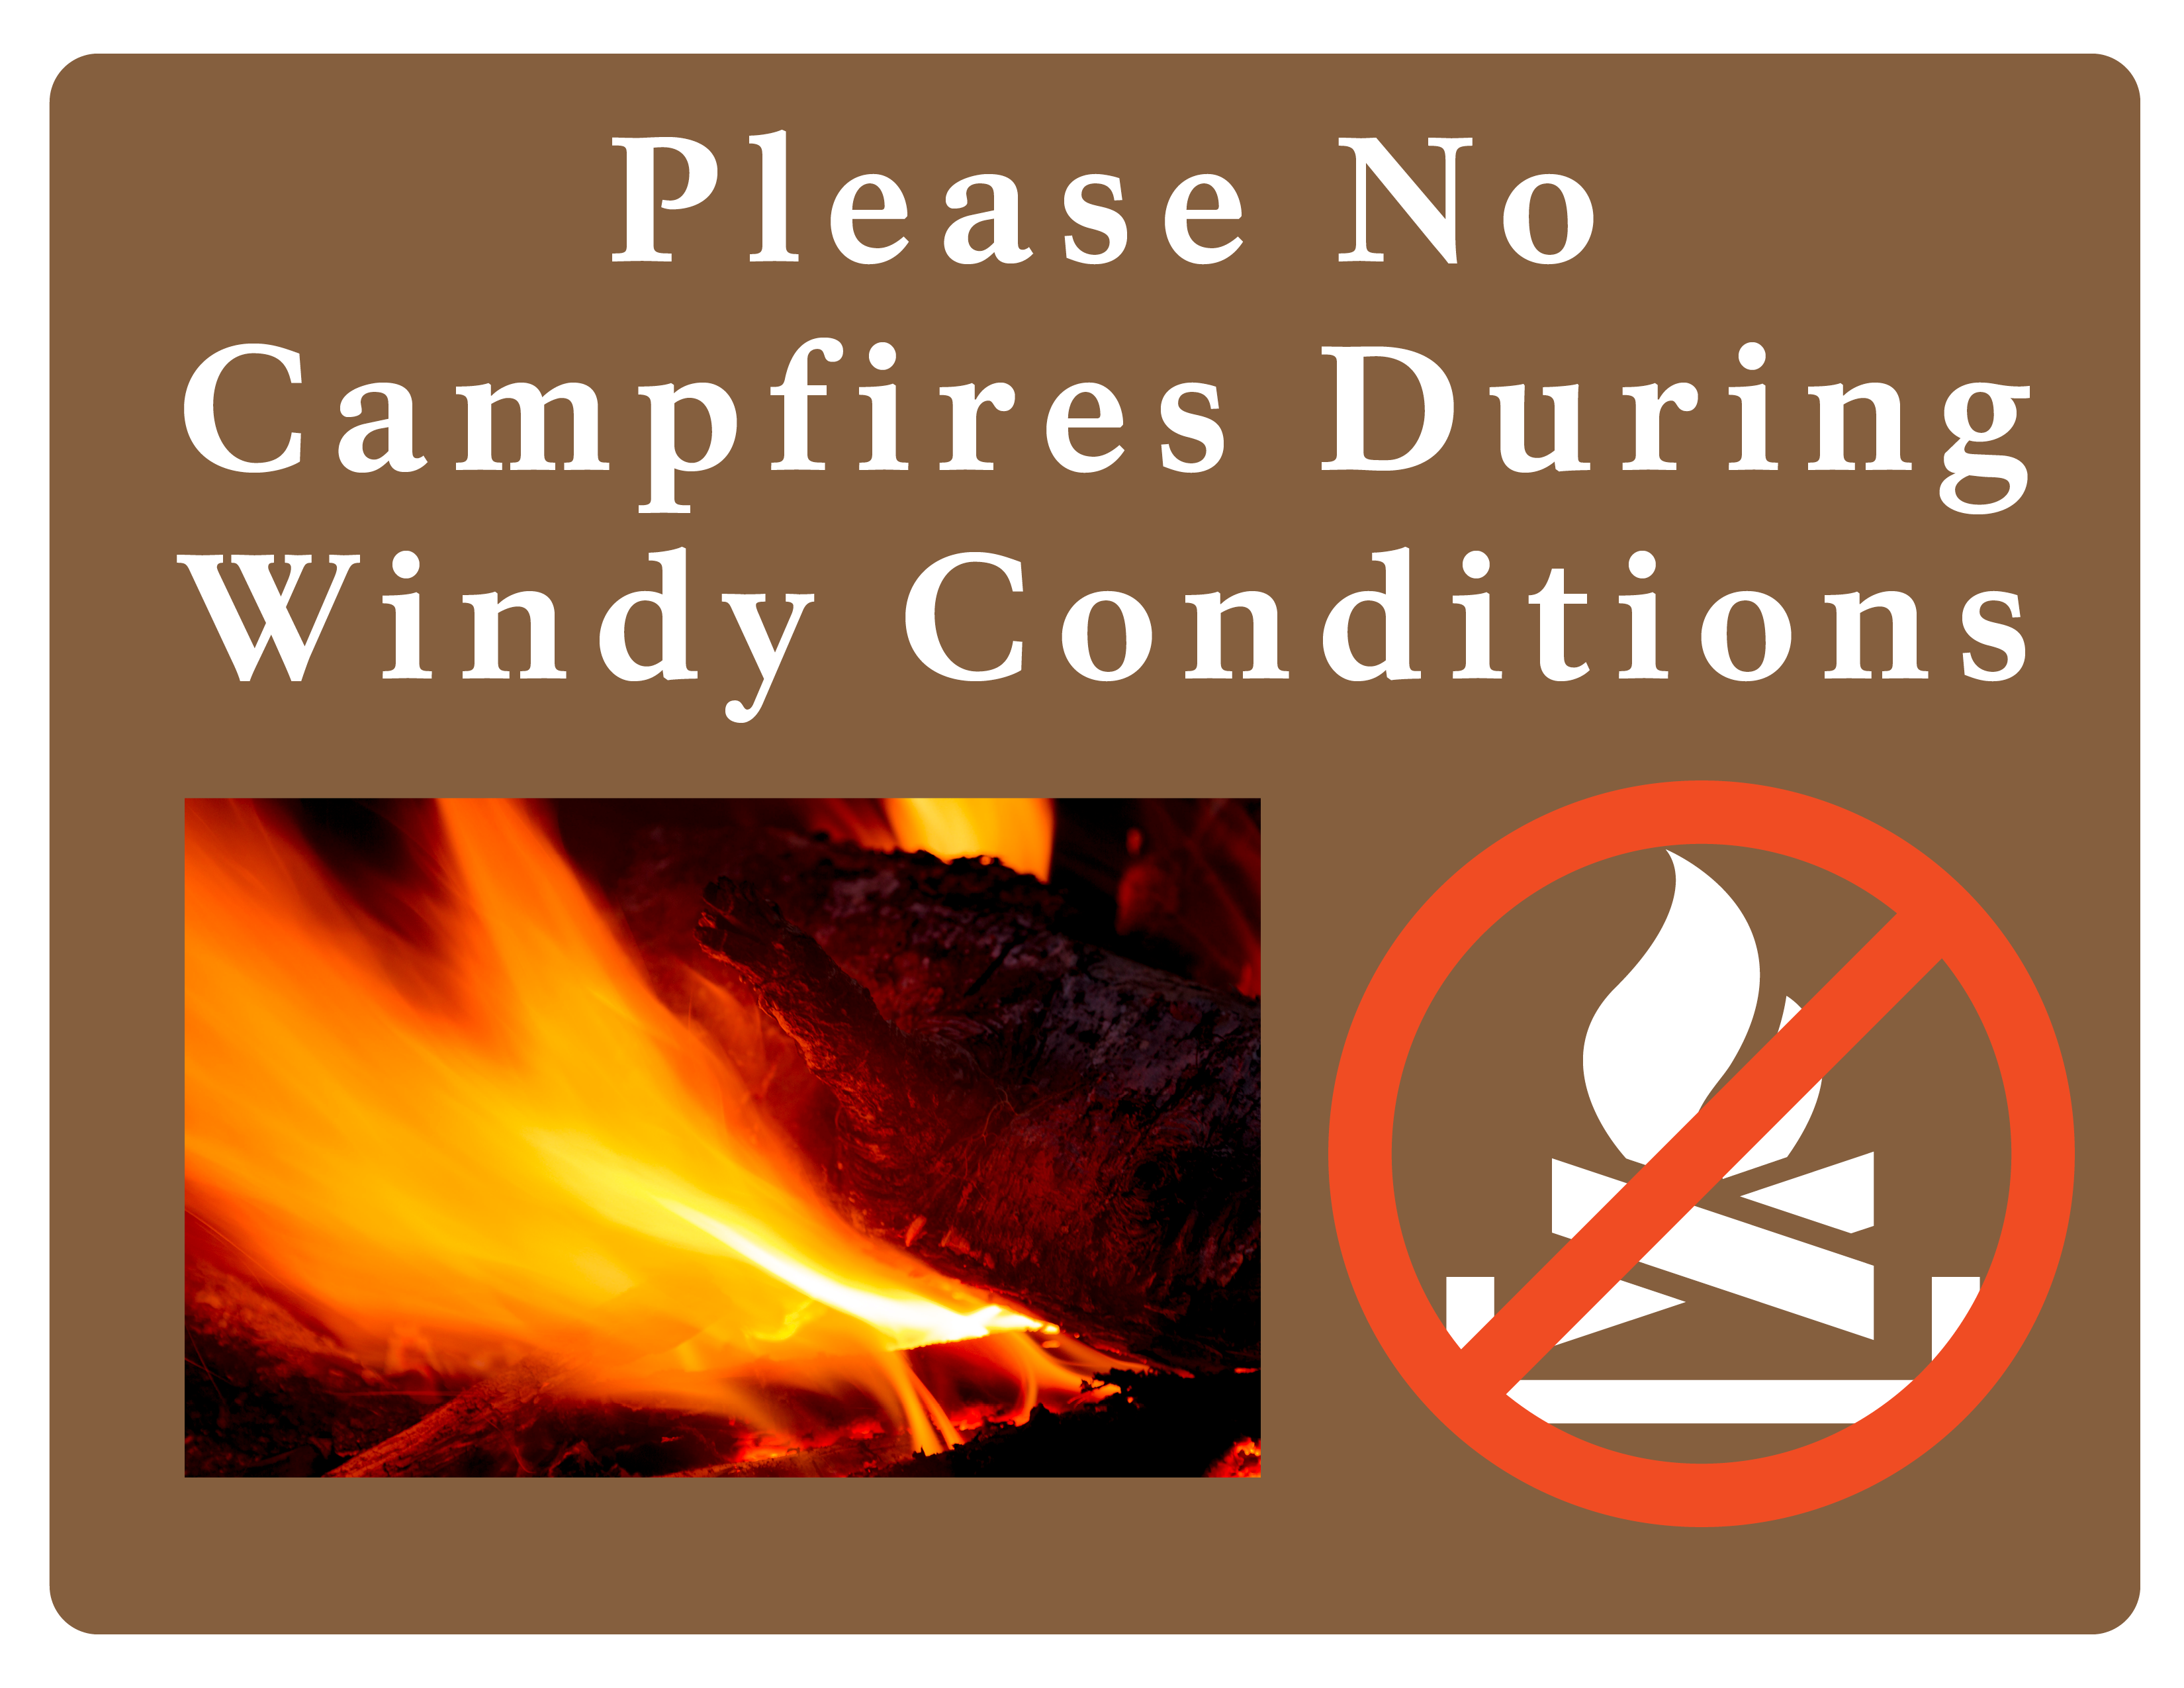 Sign with campfire photo and campfire Logo with text Please no Campfires during Windy Conditions